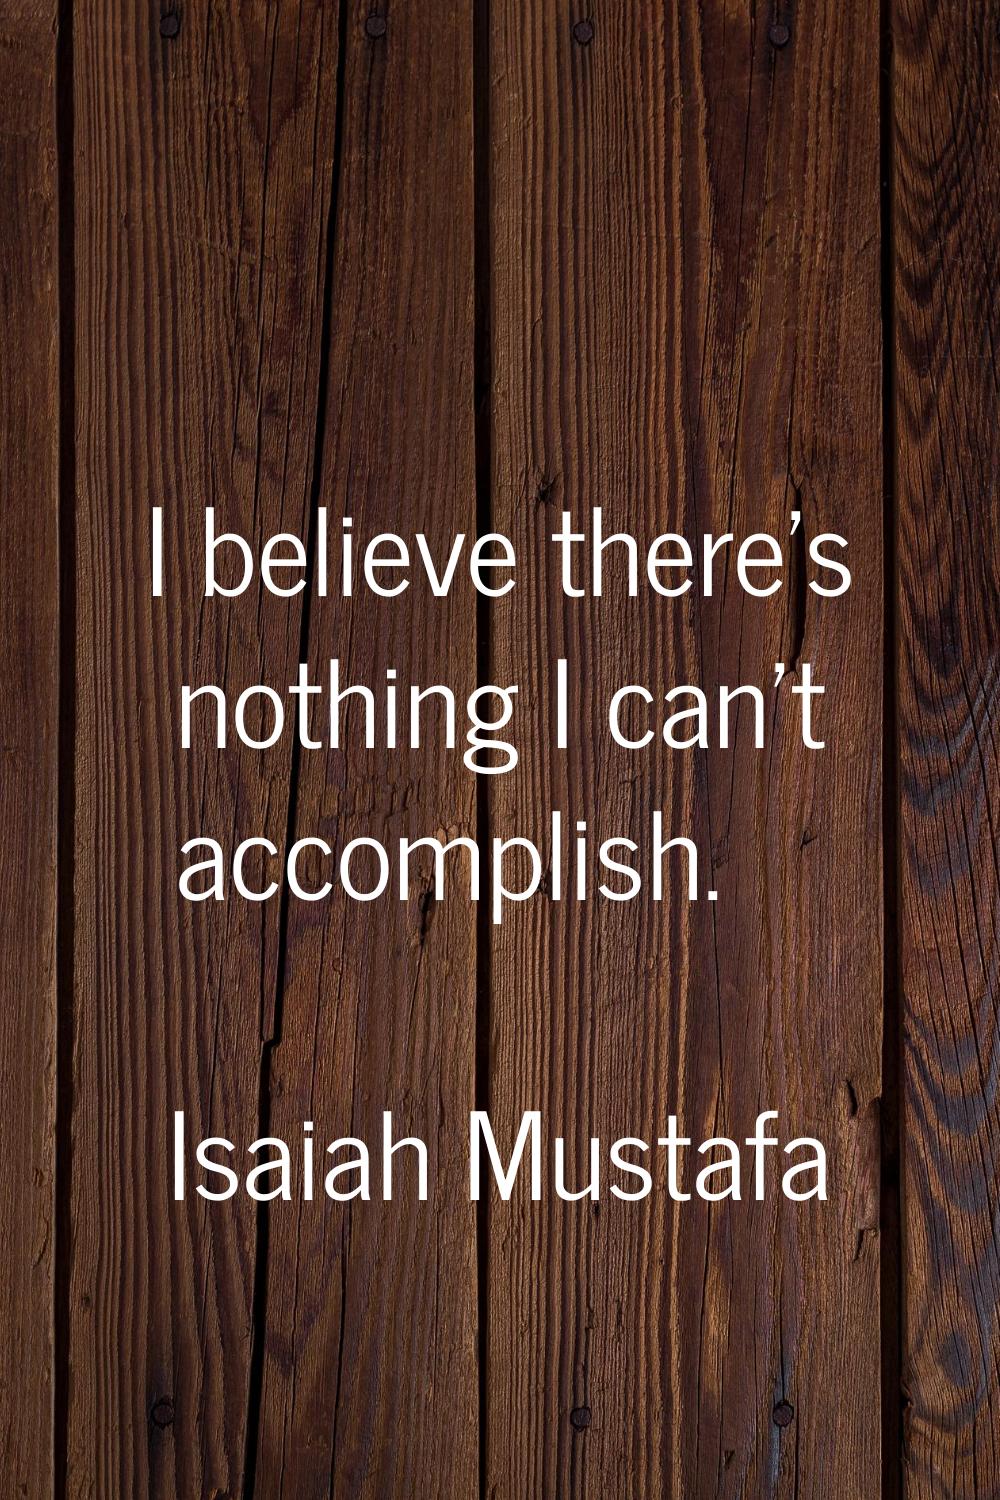 I believe there's nothing I can't accomplish.